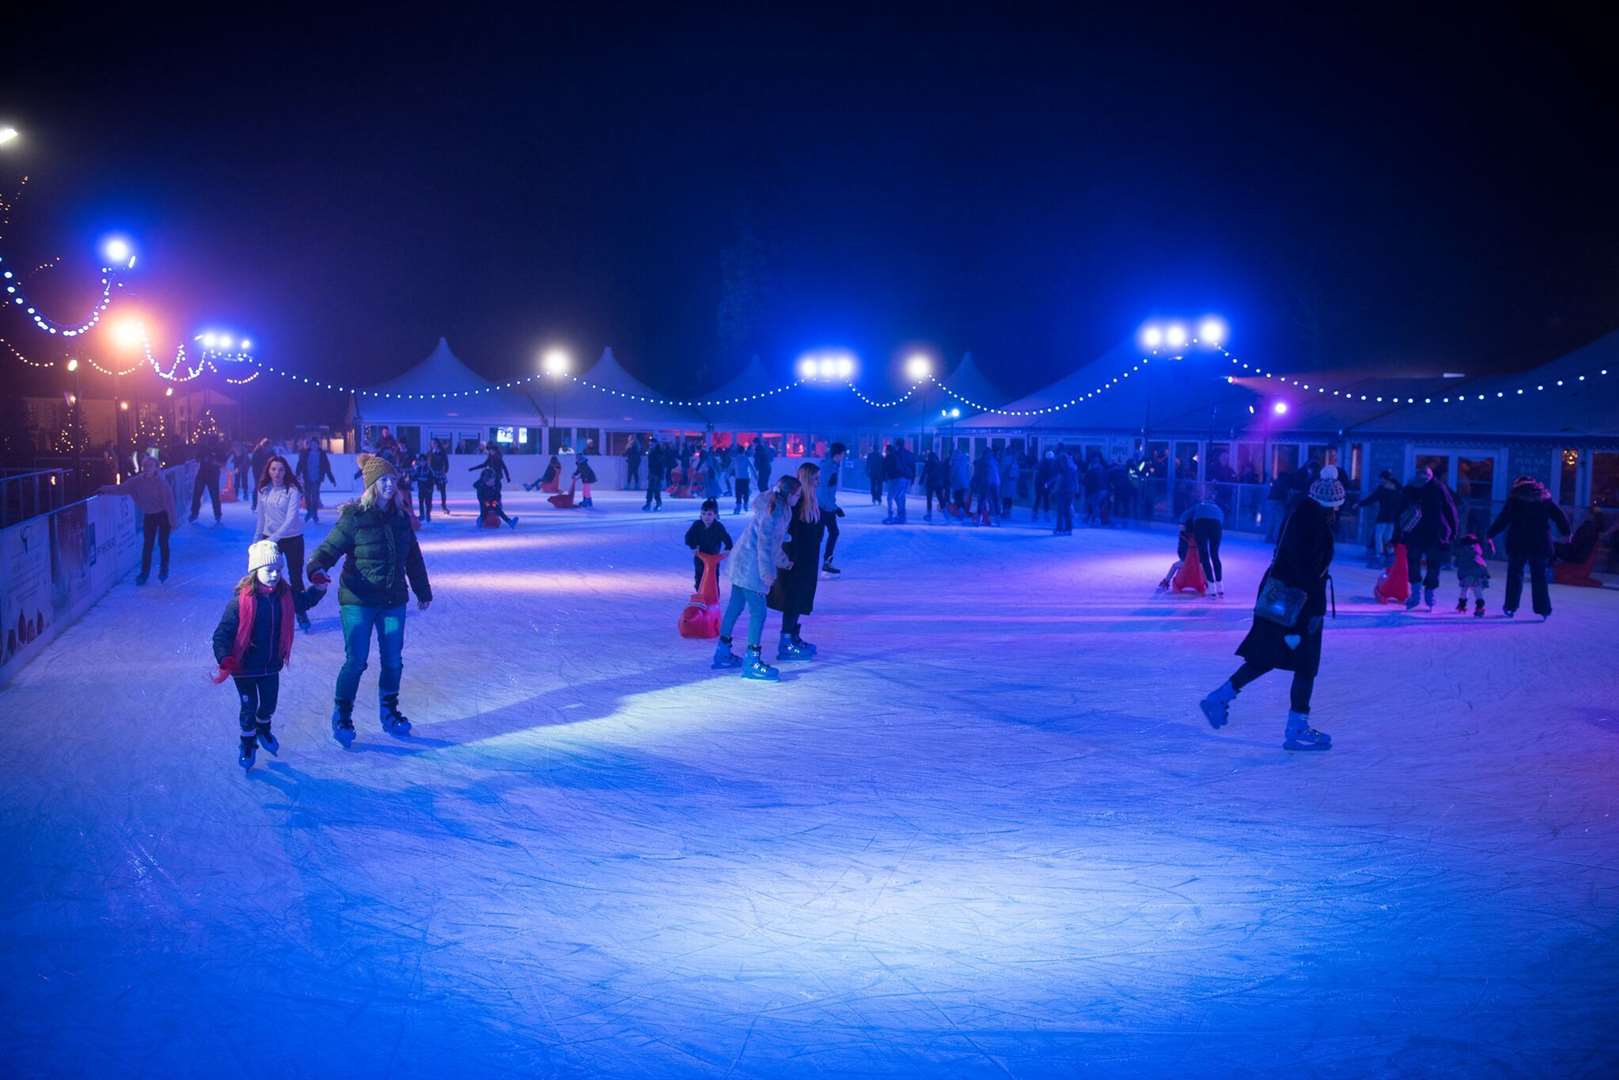 Tickets are on sale for this winter's ice rink at Tunbridge Wells